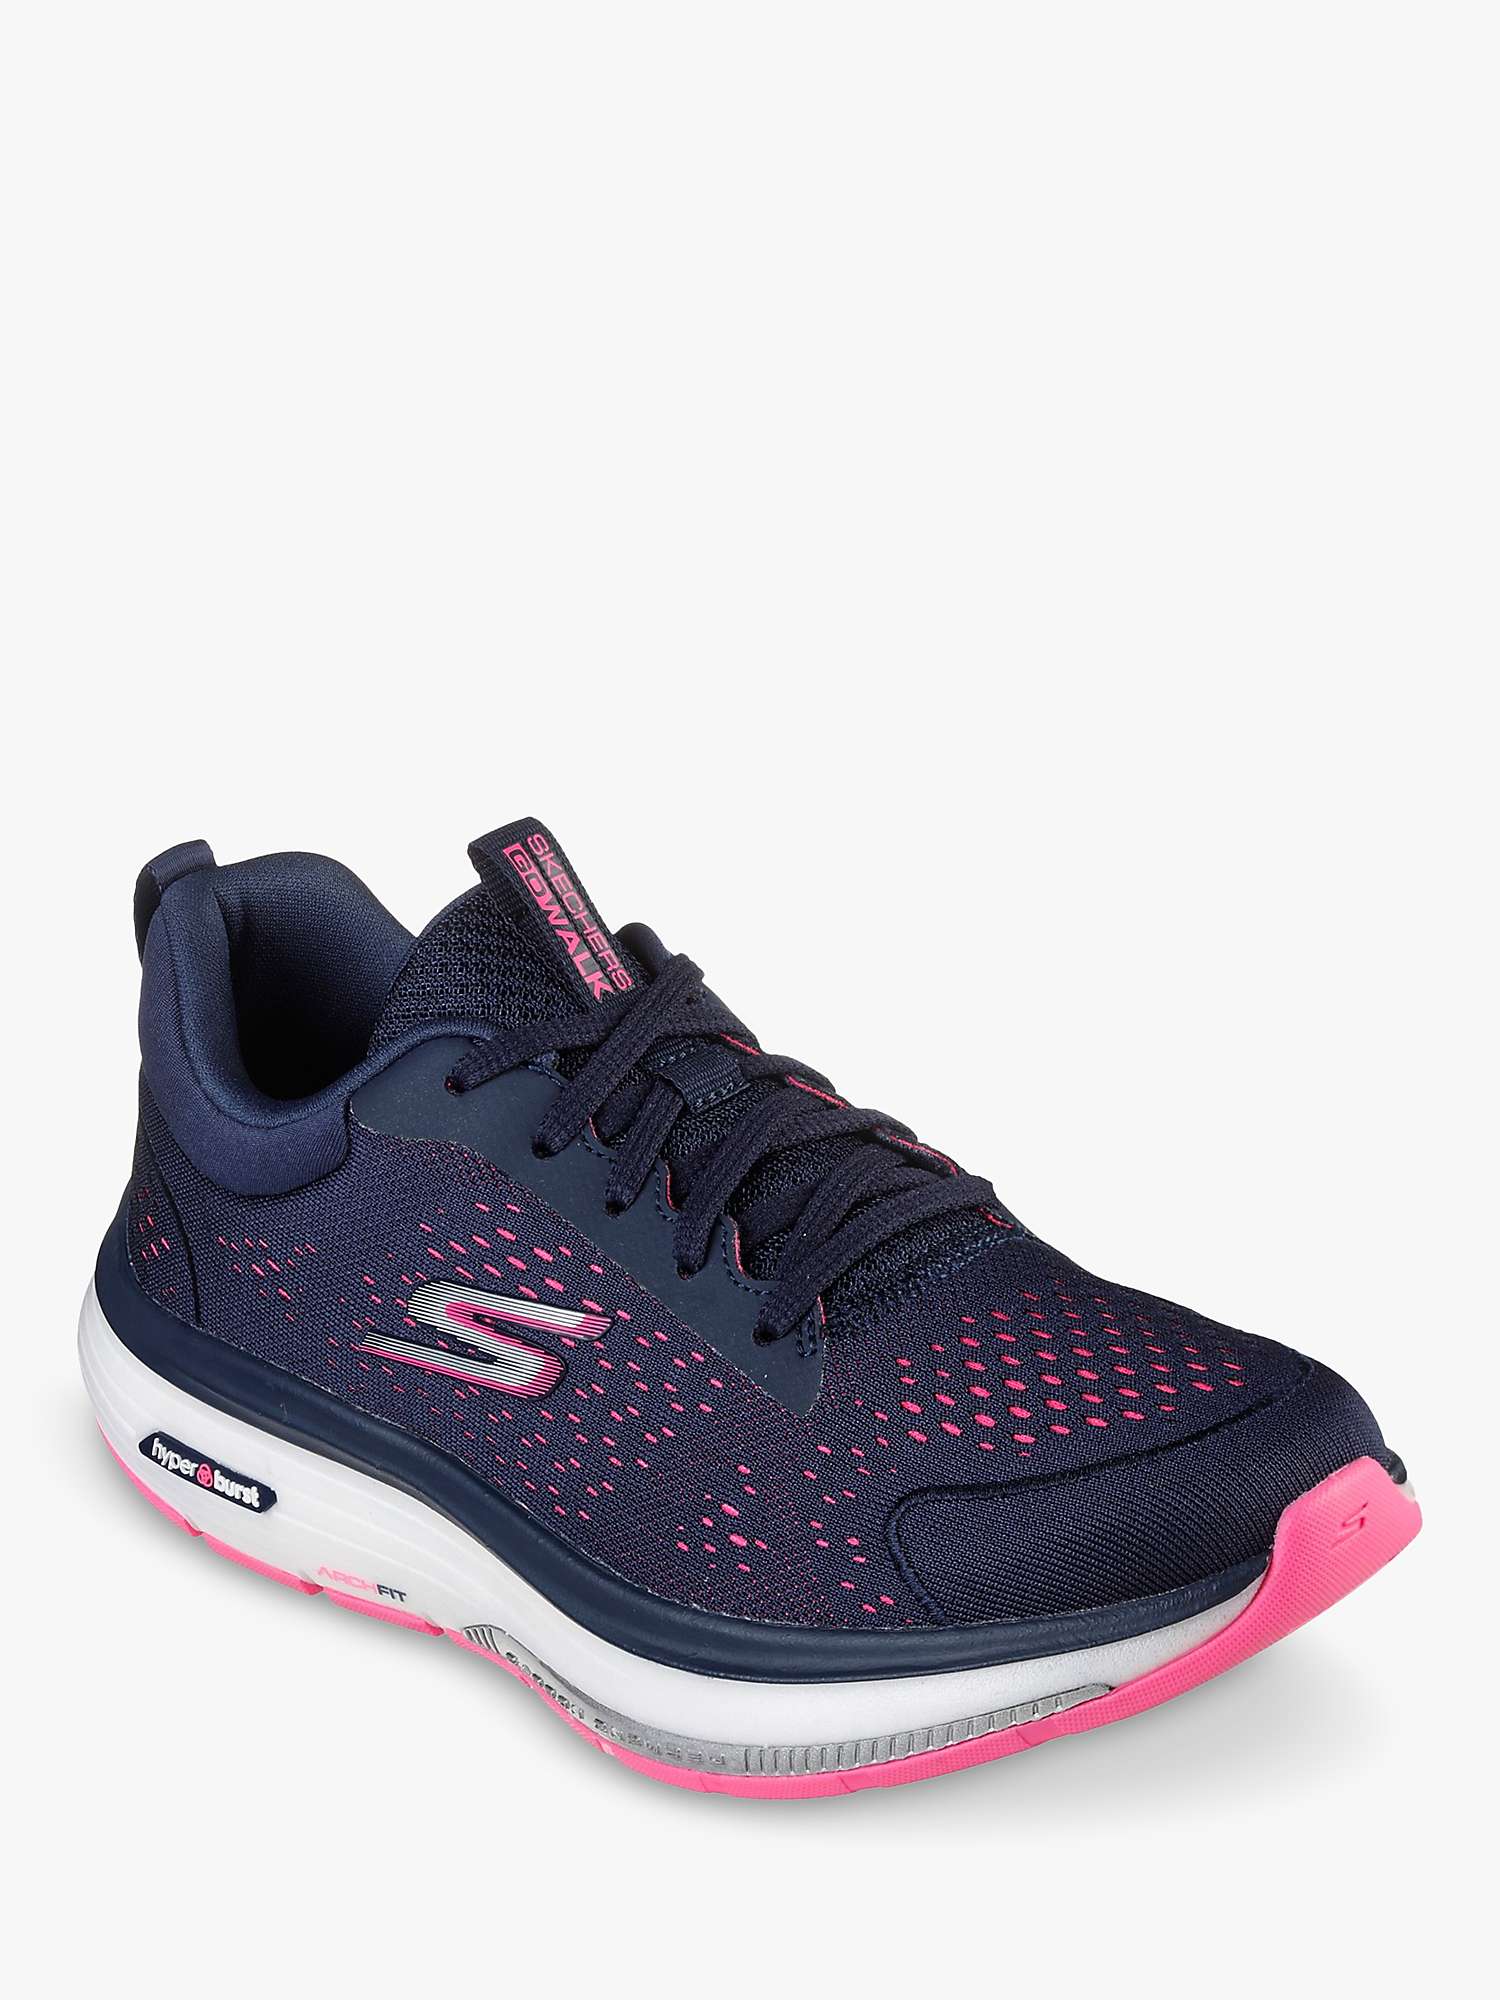 Buy Skechers Workout Walker Outpace Trainers, Navy/Multi Online at johnlewis.com